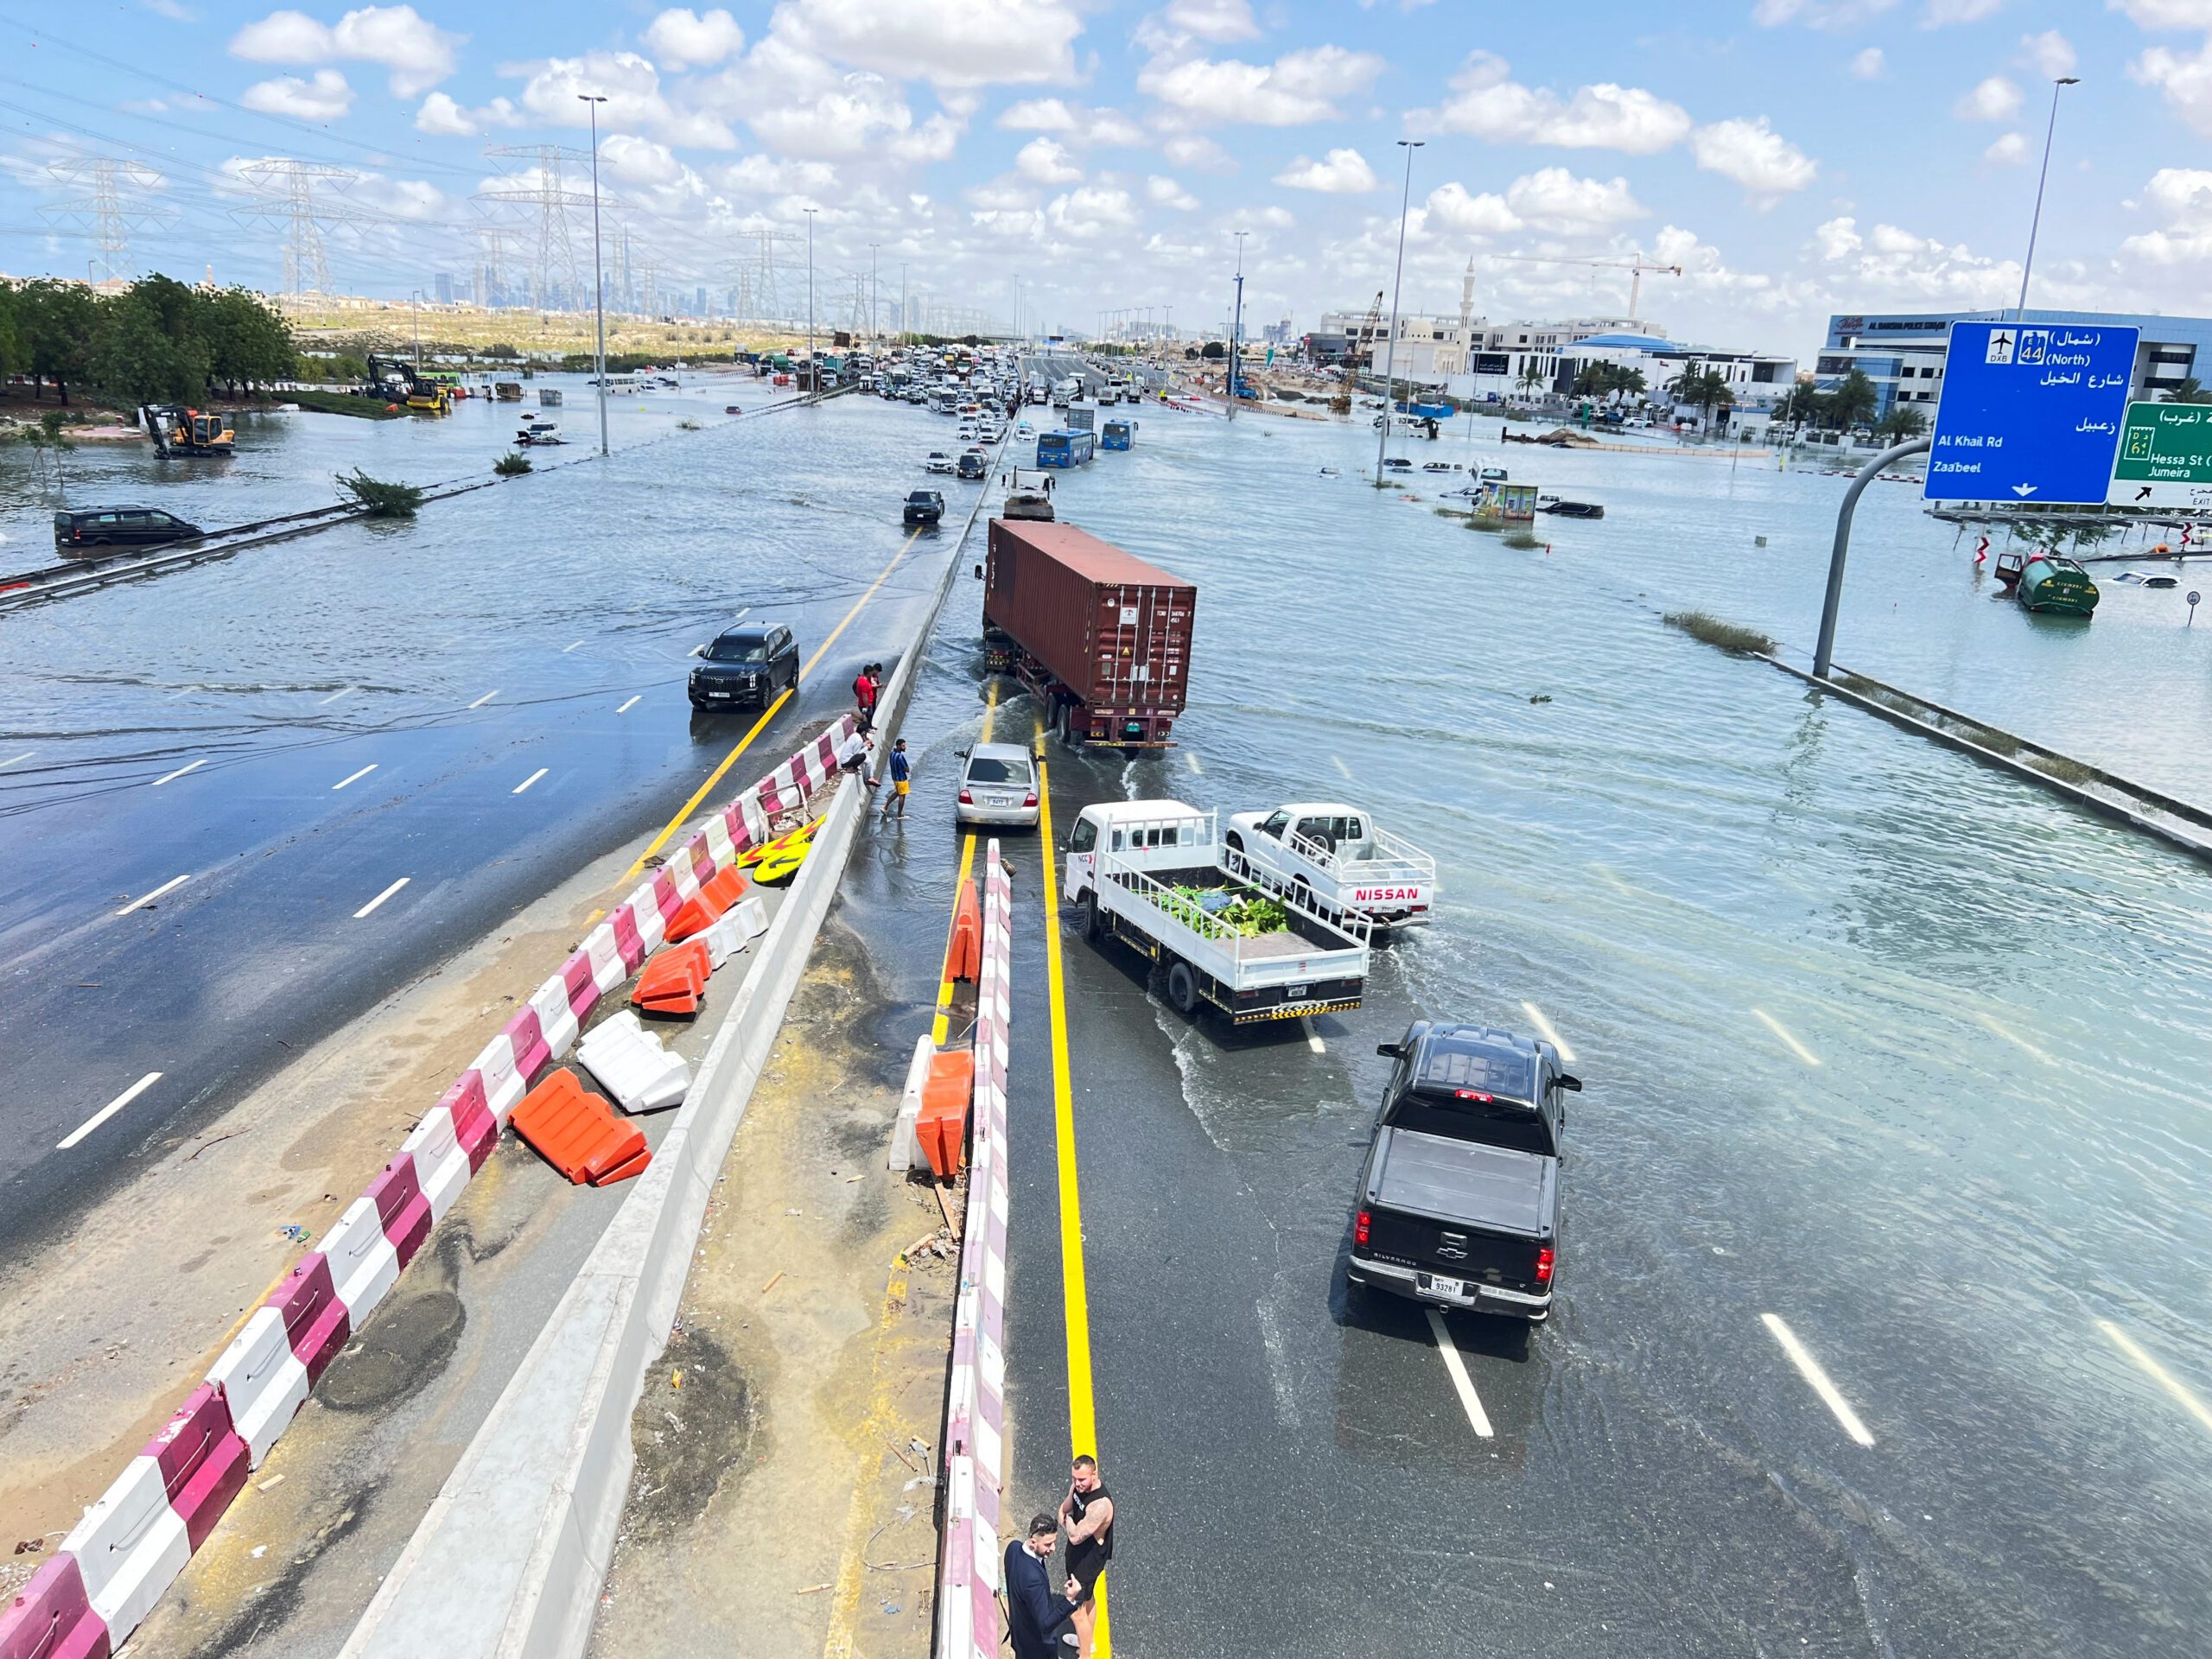 Traffic stuck on a flooded road in Dubai following April's storm and record rainfall